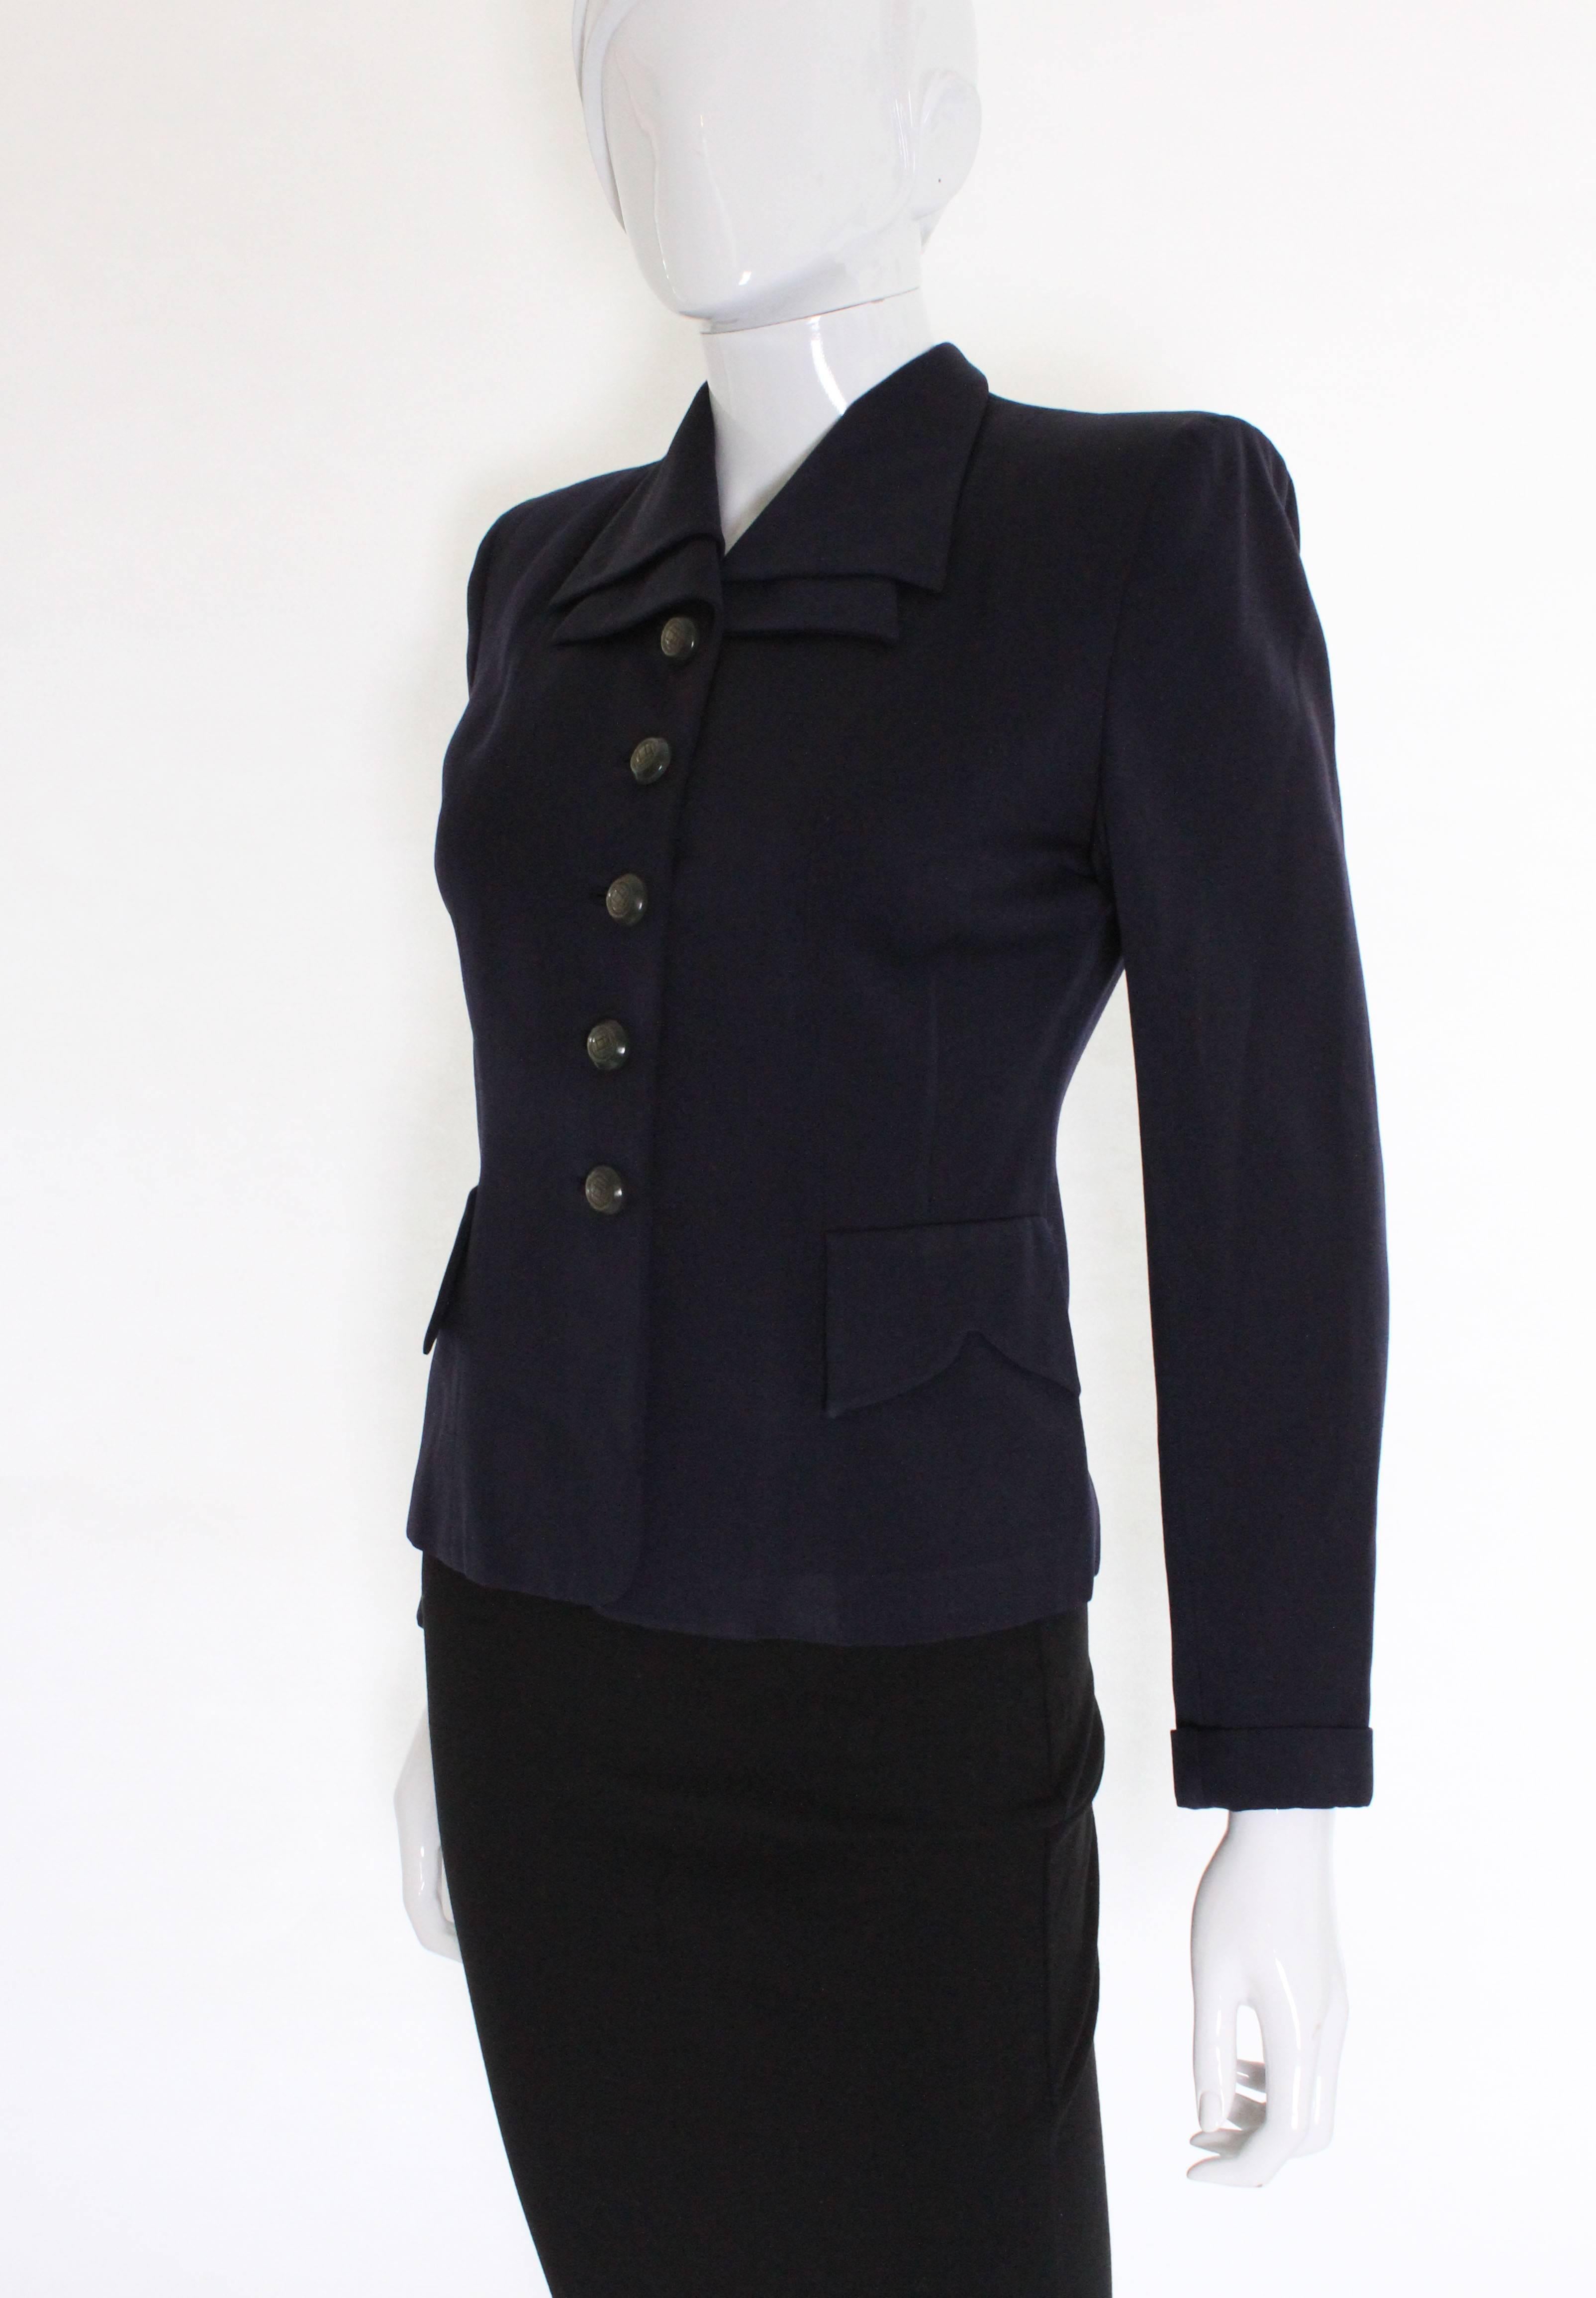 A vintage dark navy classic 1940s double collar detail jacket, made of rayon. It has faux pocket flaps on the waist at either side, which have a decorative petal shape. The back of the collar also has a lovely shape that is in 2 sections and crosses